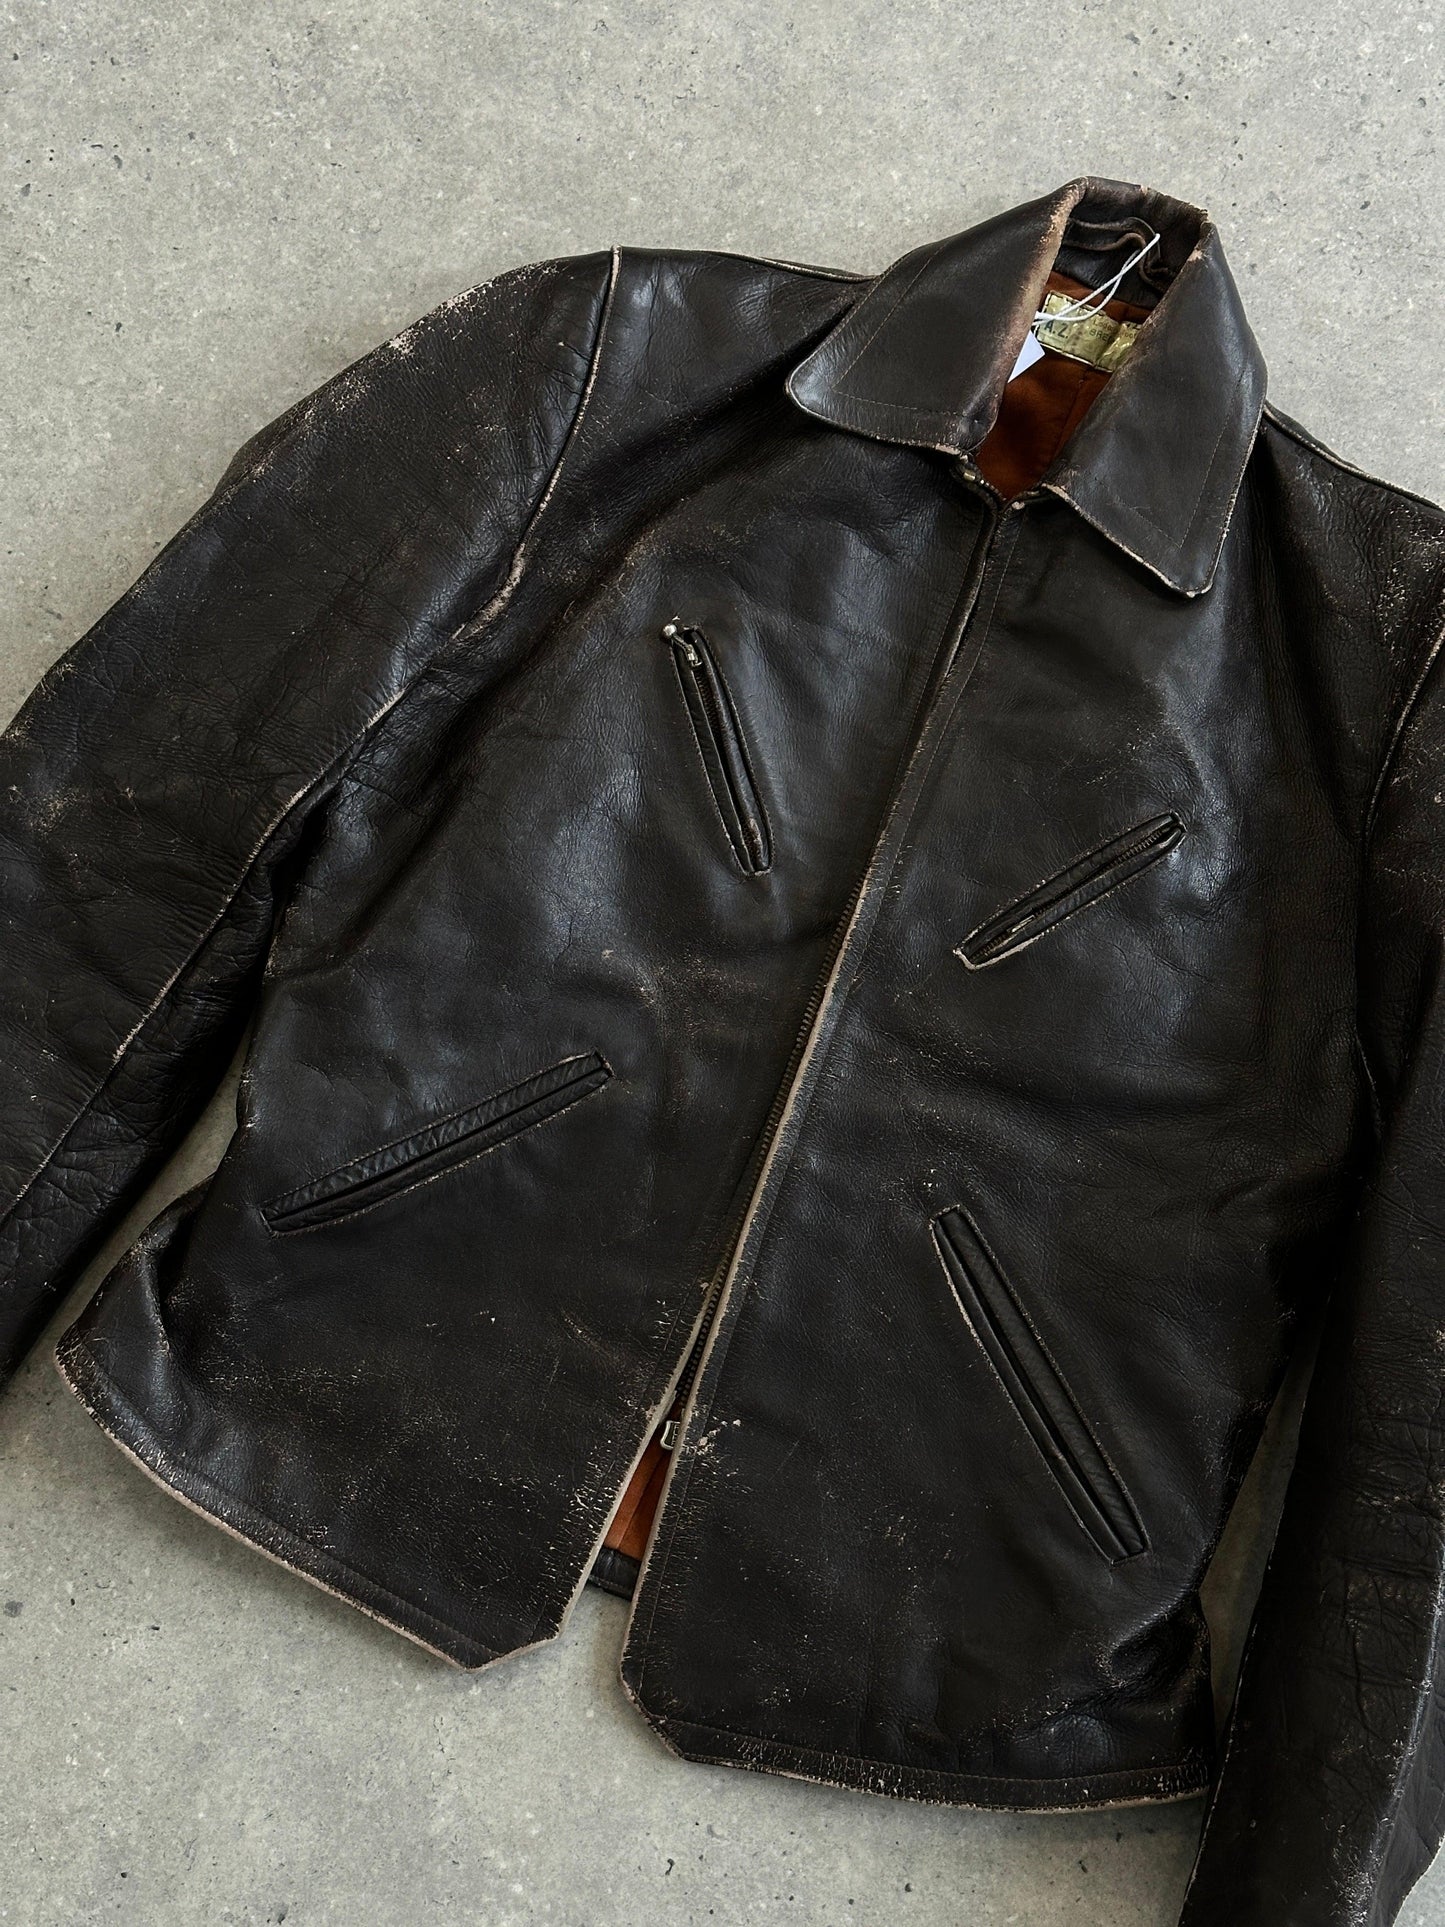 Vintage Distressed Structured Leather Jacket - S/M - Known Source